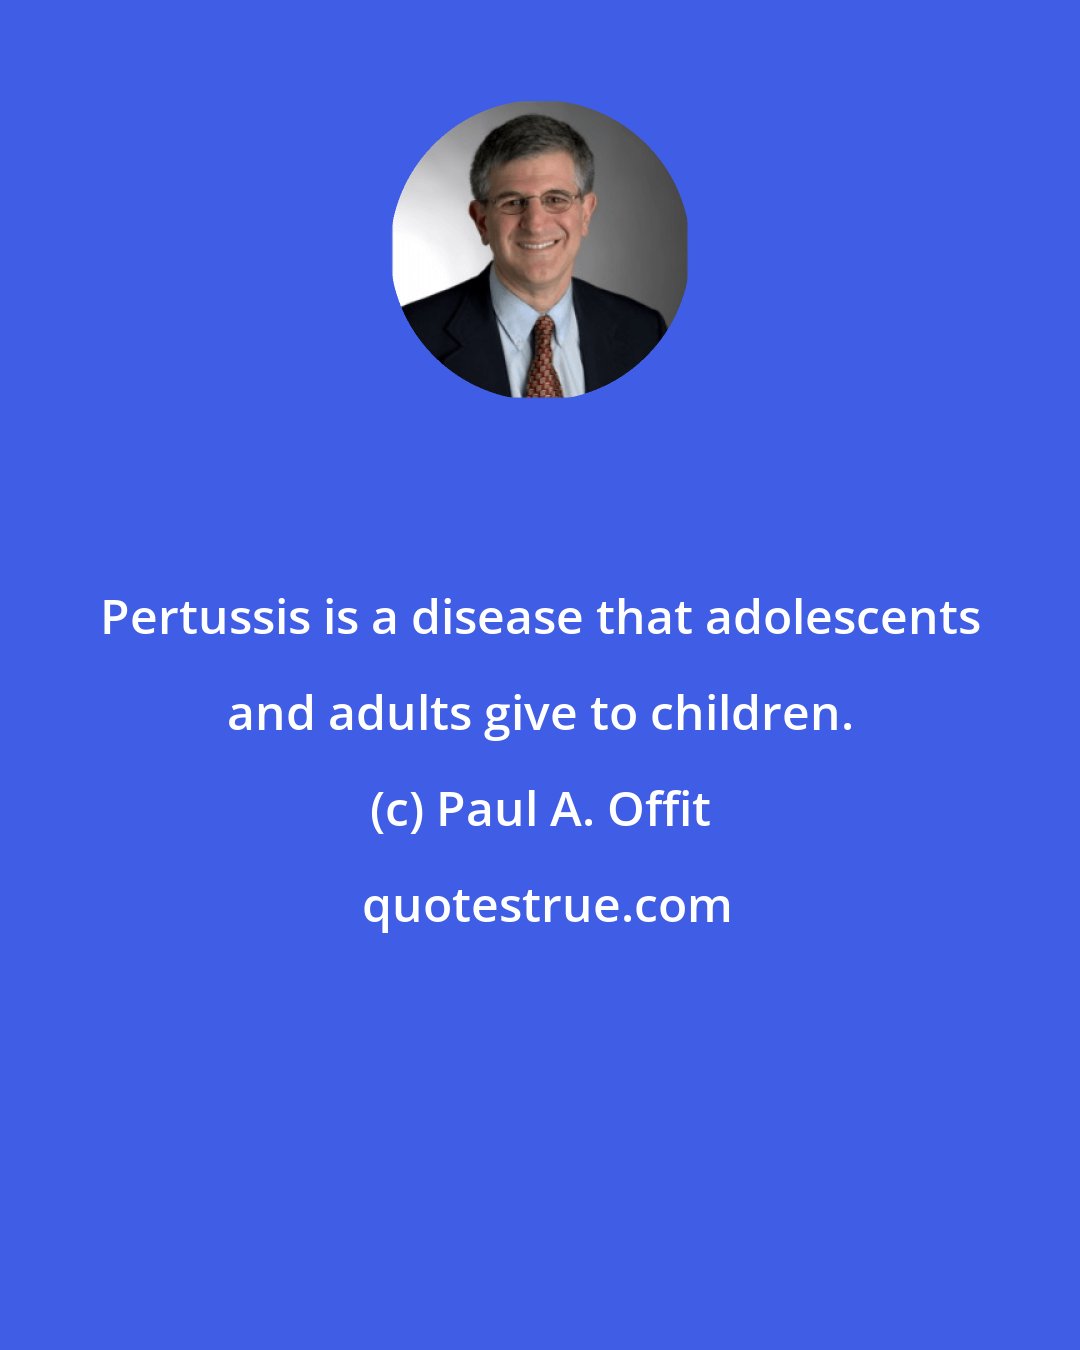 Paul A. Offit: Pertussis is a disease that adolescents and adults give to children.